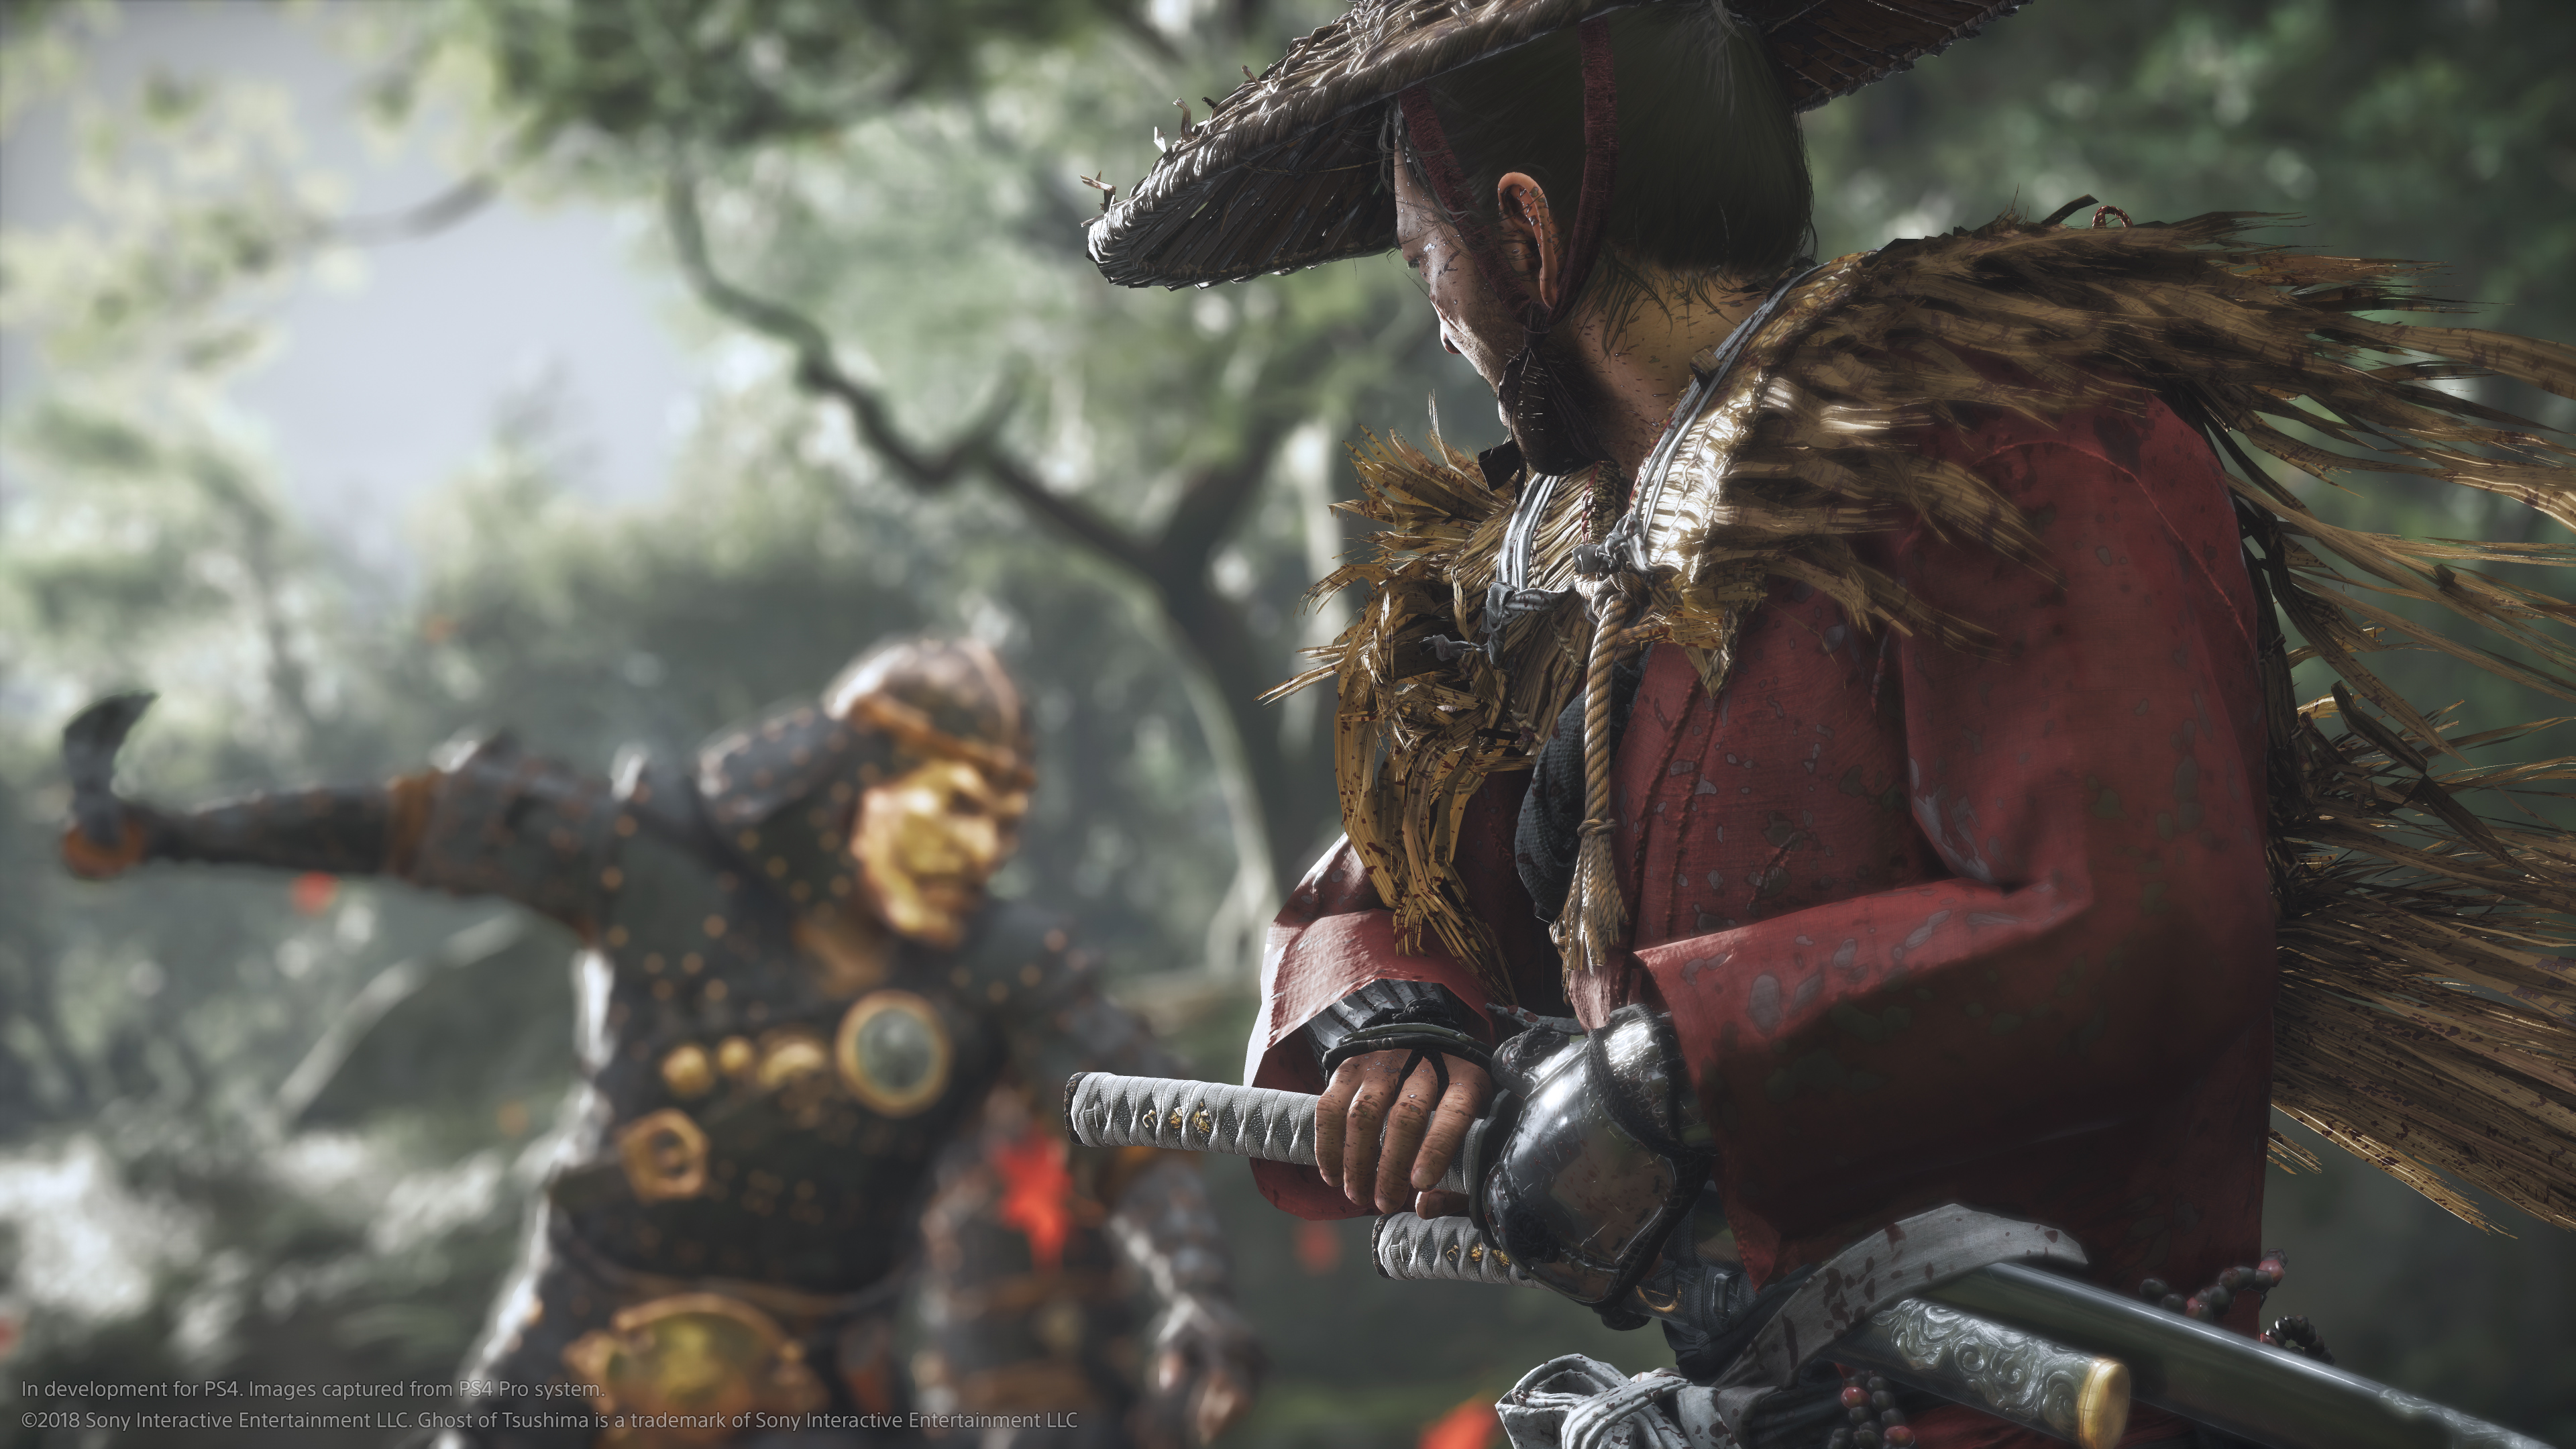 The Killing Strikes in Ghost of Tsushima How realistic are they?  (Historical write up in the comments below) : r/ghostoftsushima